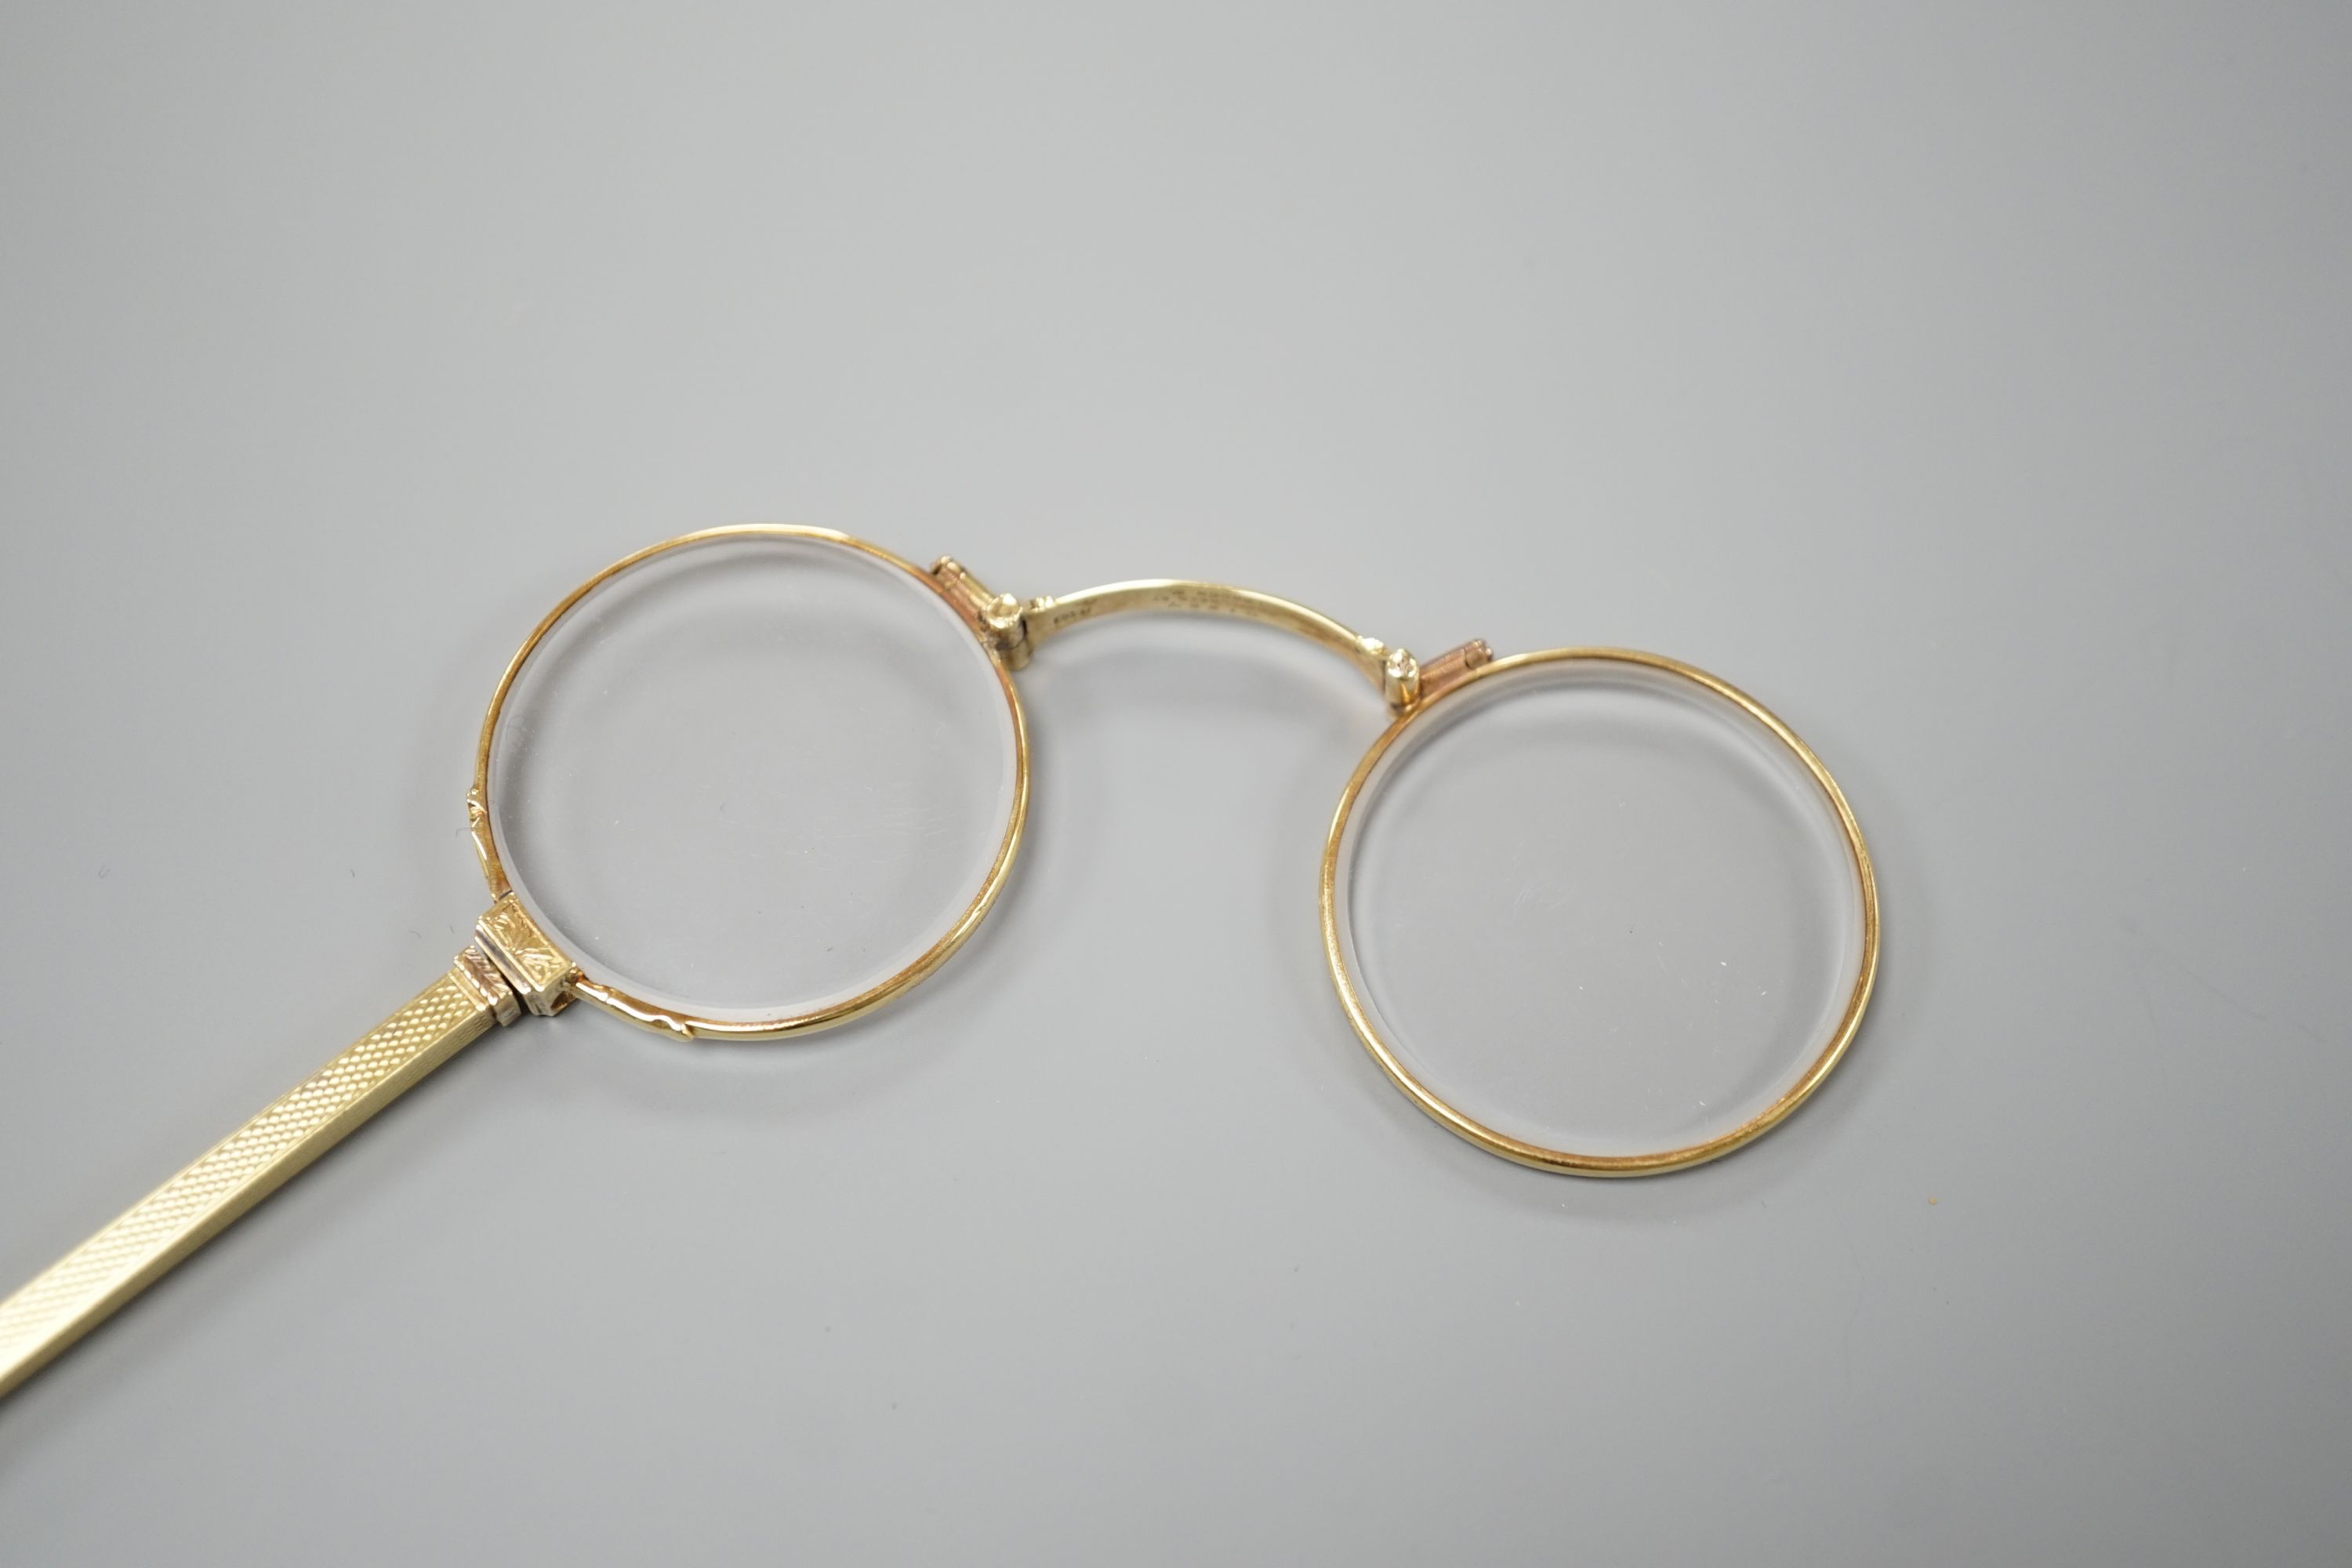 A pair of Edwardian 15ct lorgnettes, by Dixie, 20 Welbeck Street, London, with engine turned handle, 11.4cm, gross weight 28.9 grams.